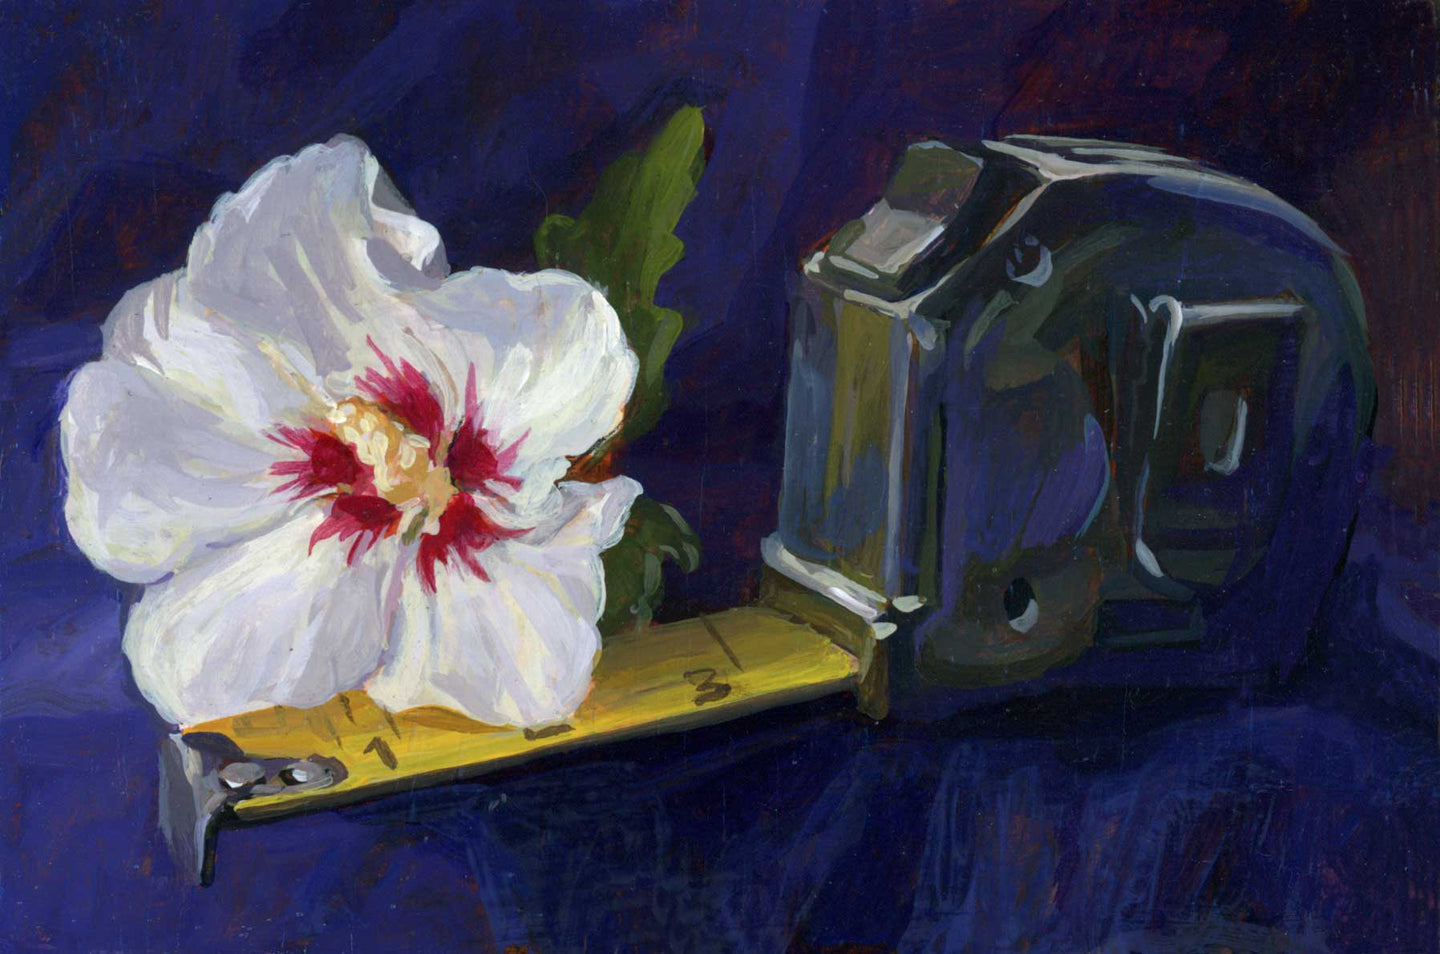 79. Hibiscus and Tape Measure